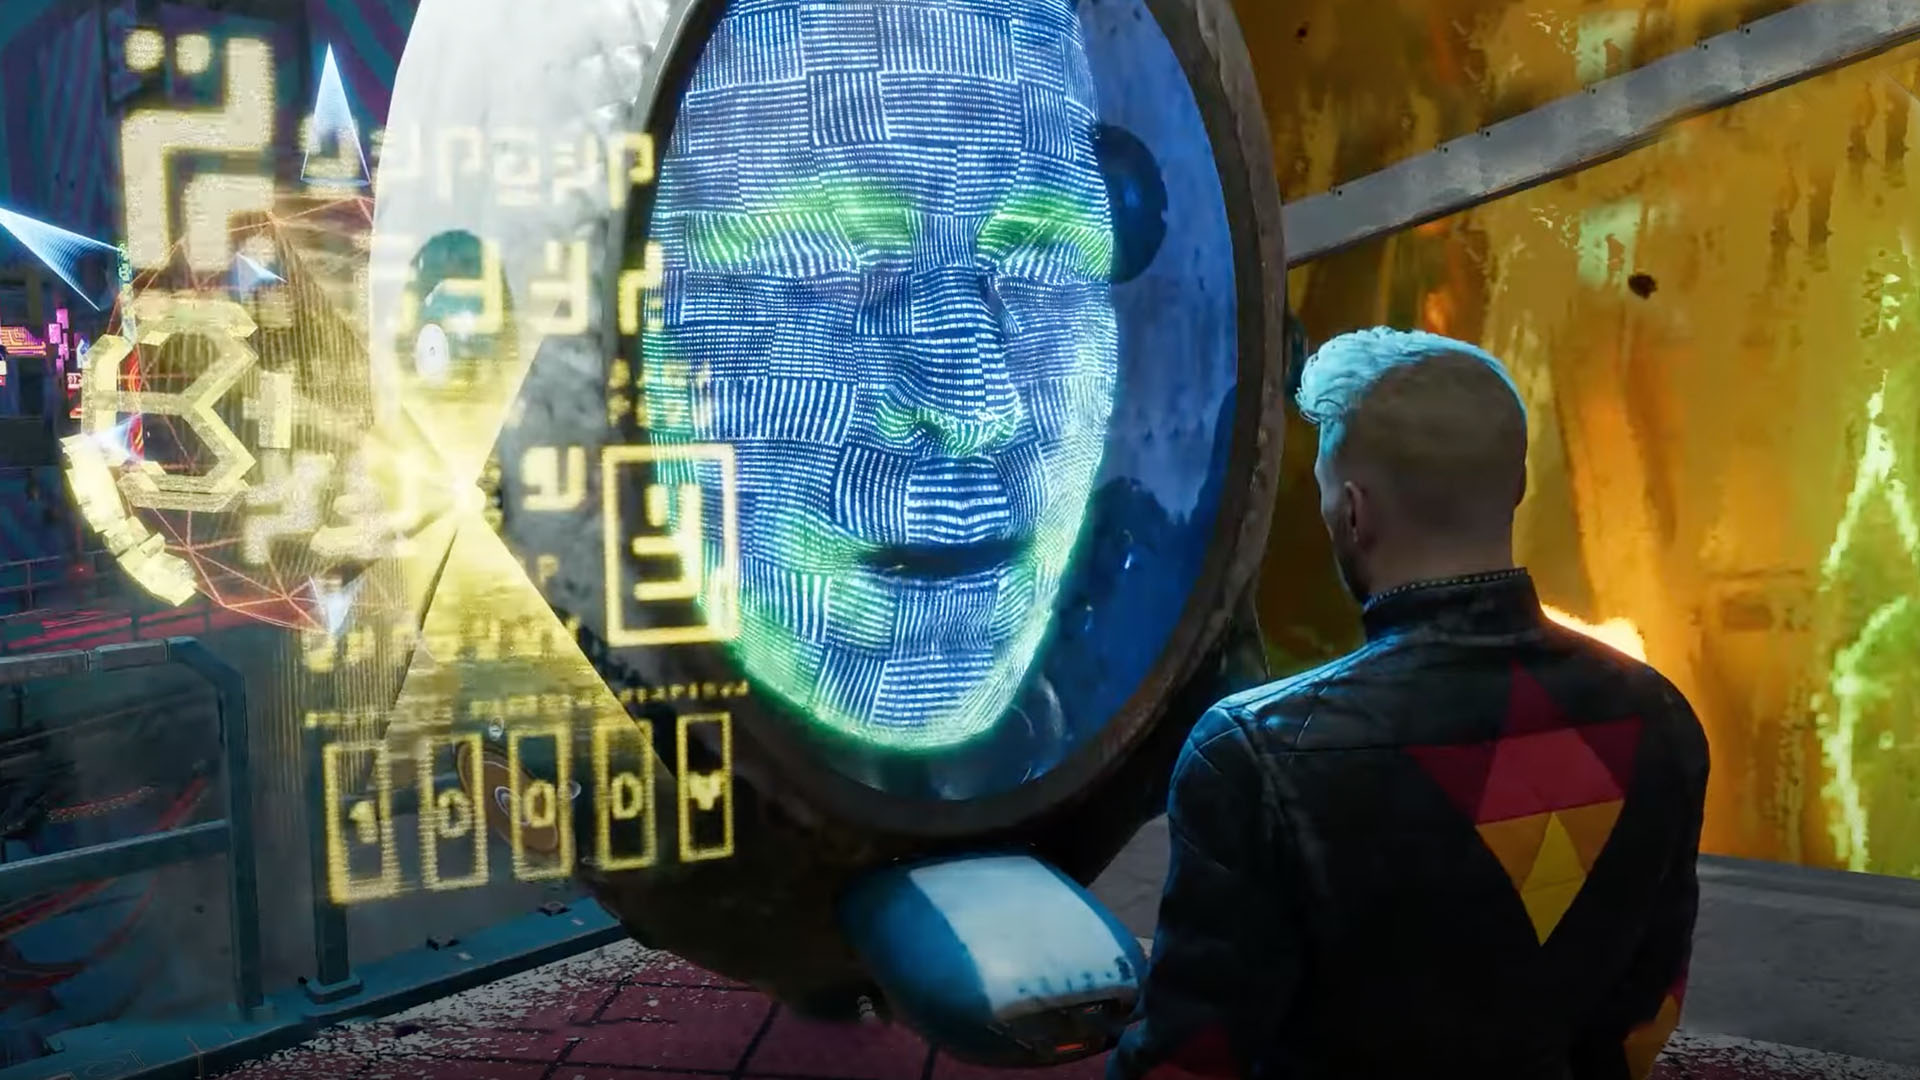 Guardians of the Galaxy lottery ticket Machine location - The West News